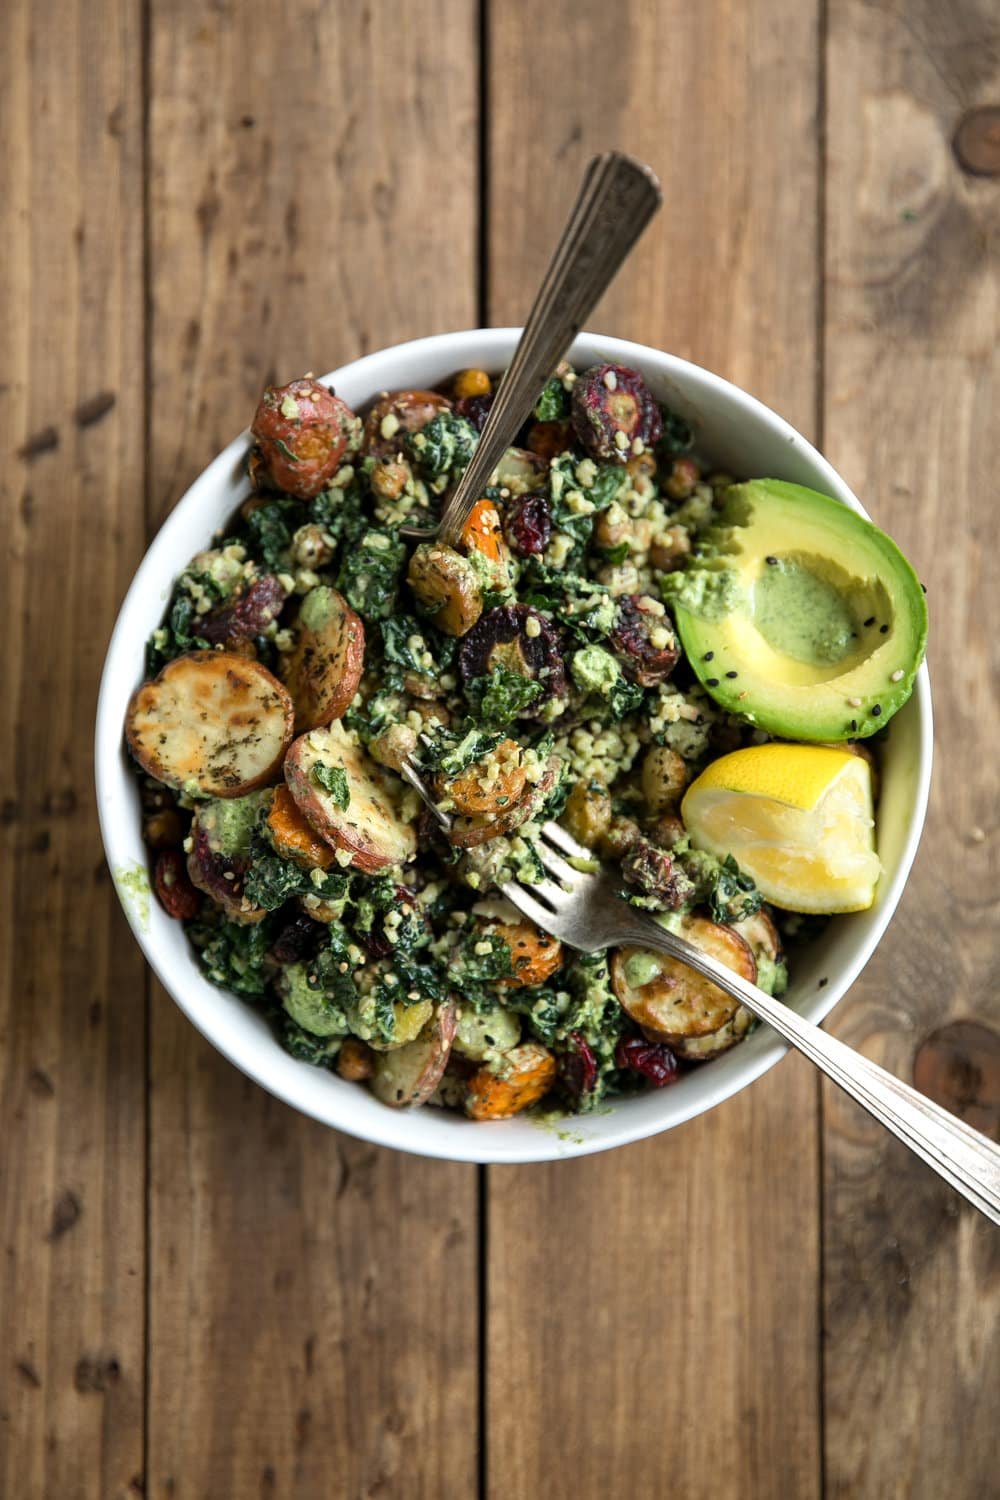 This Kale and Roasted Veggie Salad with Tahini Yogurt Pesto combines healthy, energy-packed power foods like kale, chickpeas, and carrots into one delicious bowl.